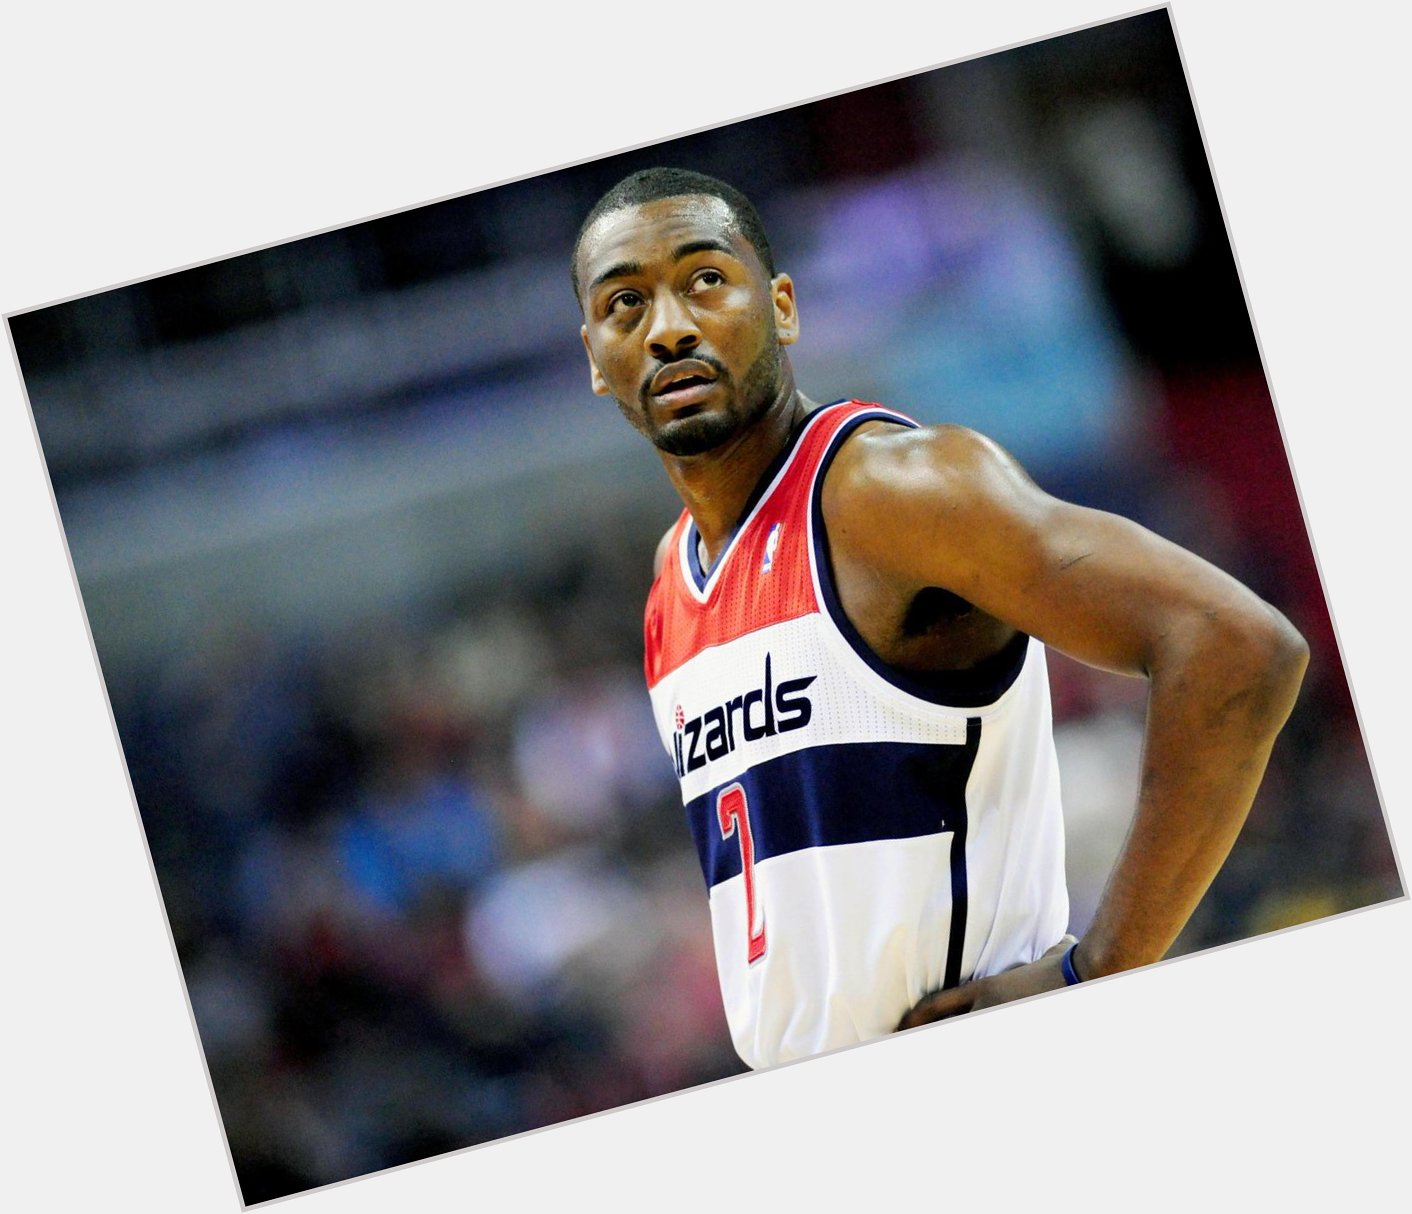 Happy birthday to John wall he is awesome he\s a future hall of famer no doubt best of luck with the Wizards team. 